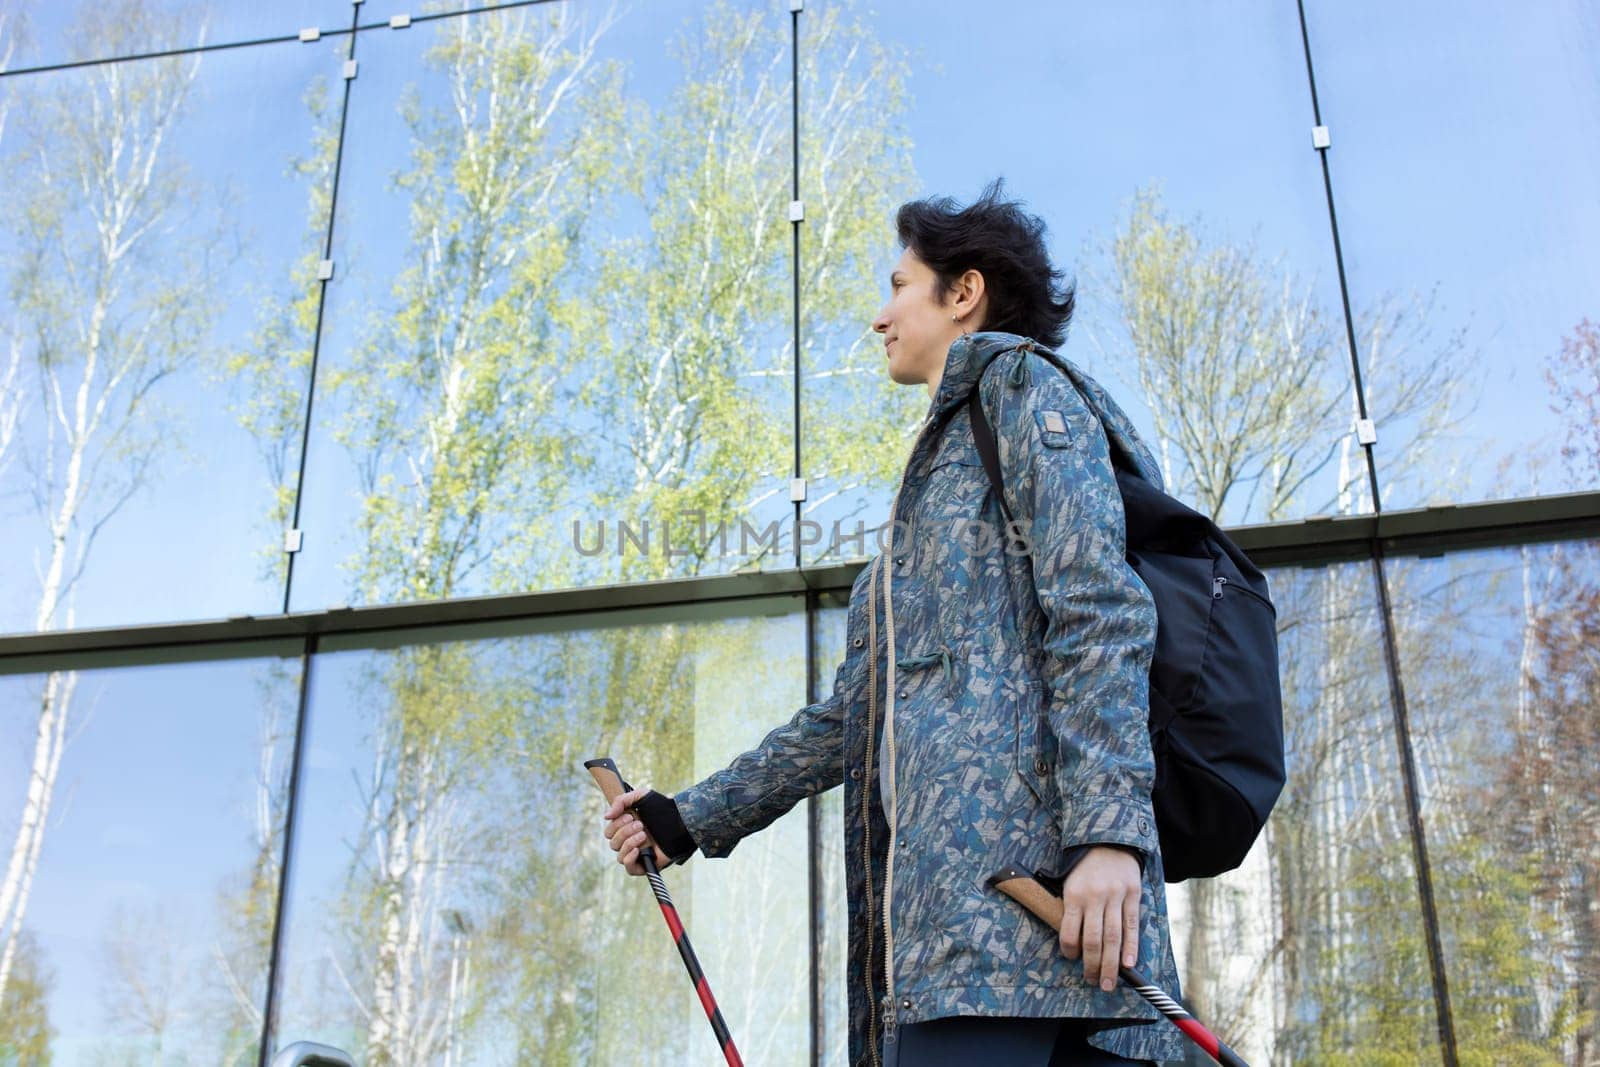 Pole Walking In Urban City. Beautiful Happy Caucasian Woman Training With Sticks Outdoor, Modern Glass Eco Building on Background. Physical Activity, Nordic Walk, Recreation. Horizontal Plane by netatsi